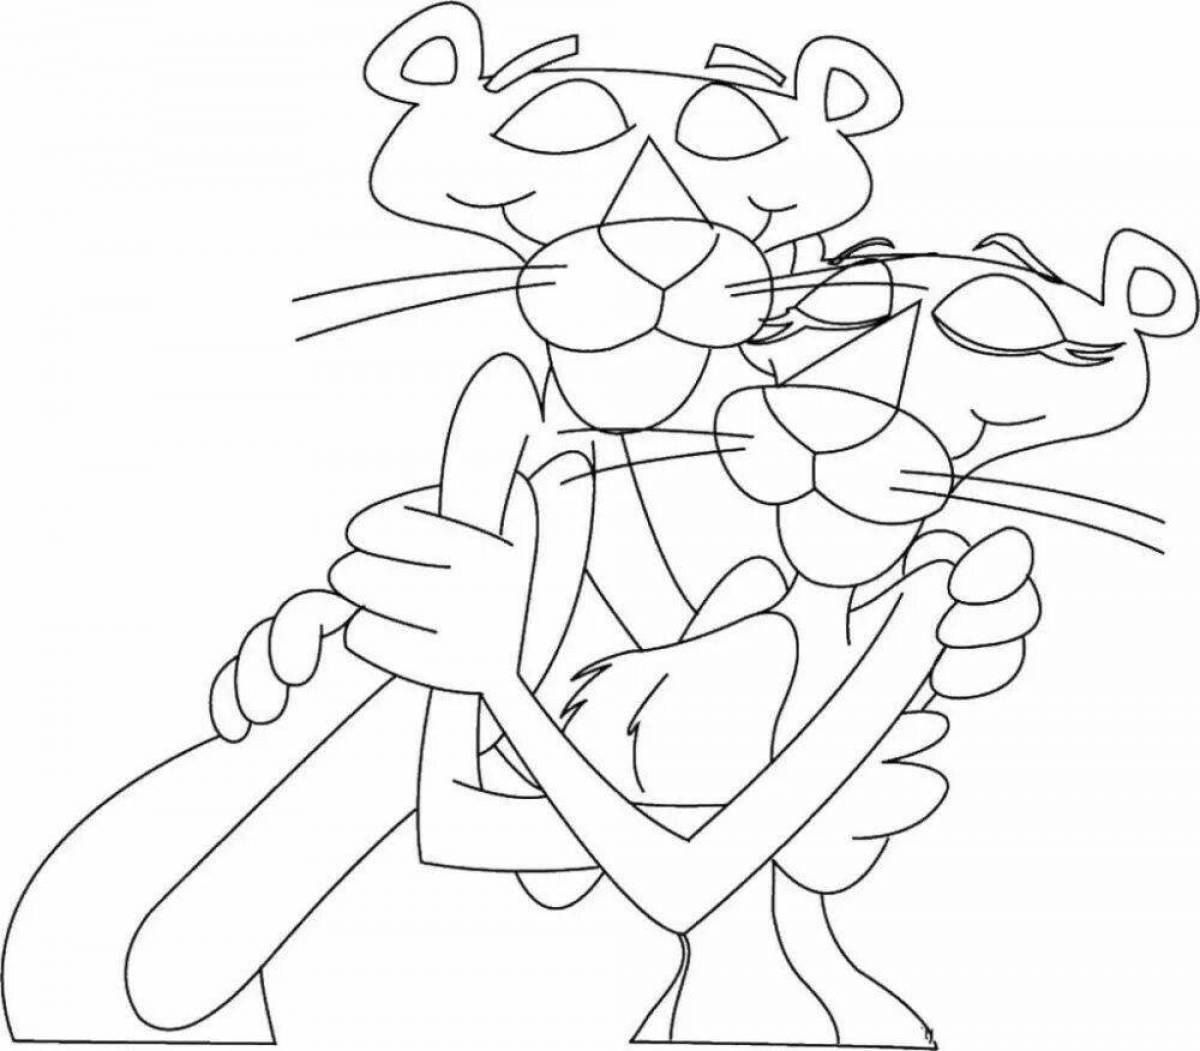 Adorable Pink Panther Coloring Page